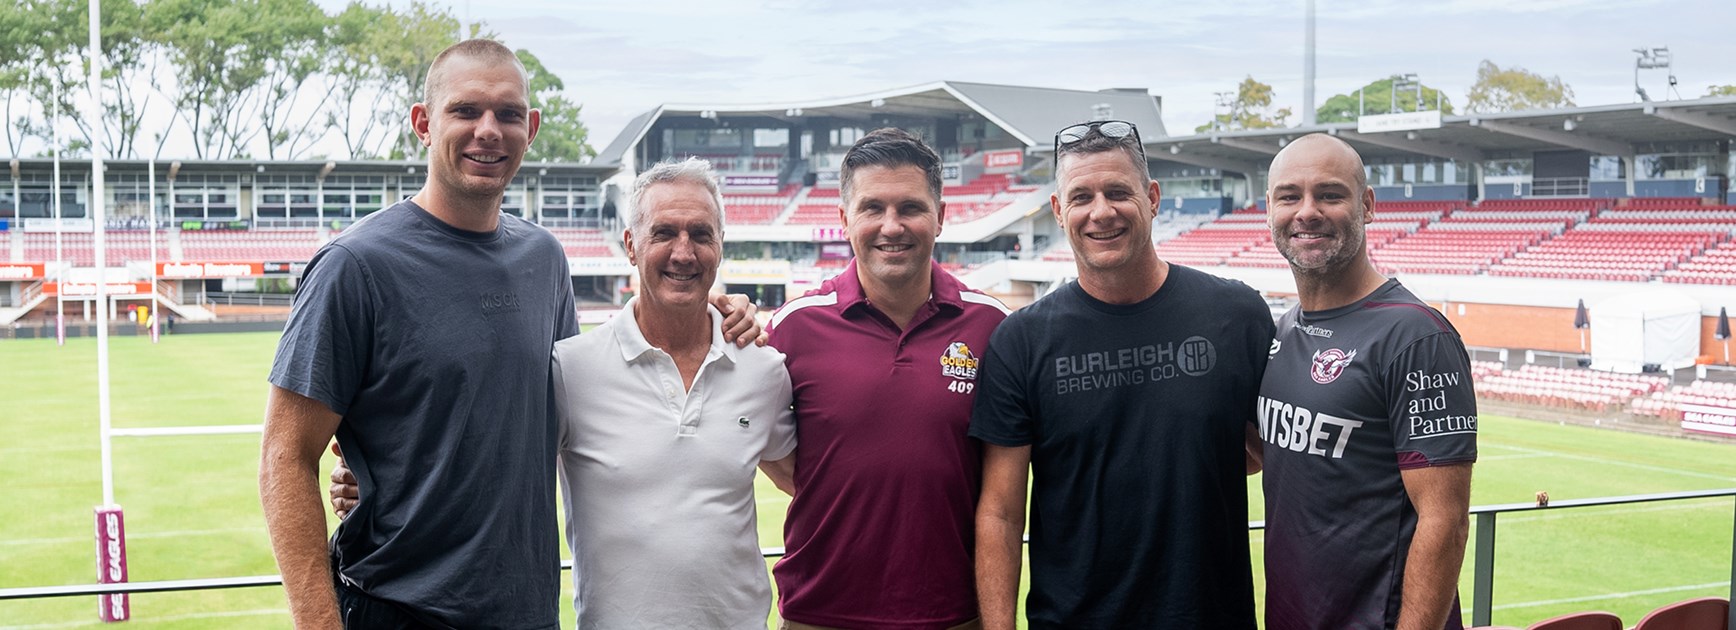 Past and present Manly full-backs (l-r) Tom Trbojevic, Mike Eden, Shannon Nevin, Andrew King, and Brett Stewart at the Golden Eagles Barbecue Lunch.